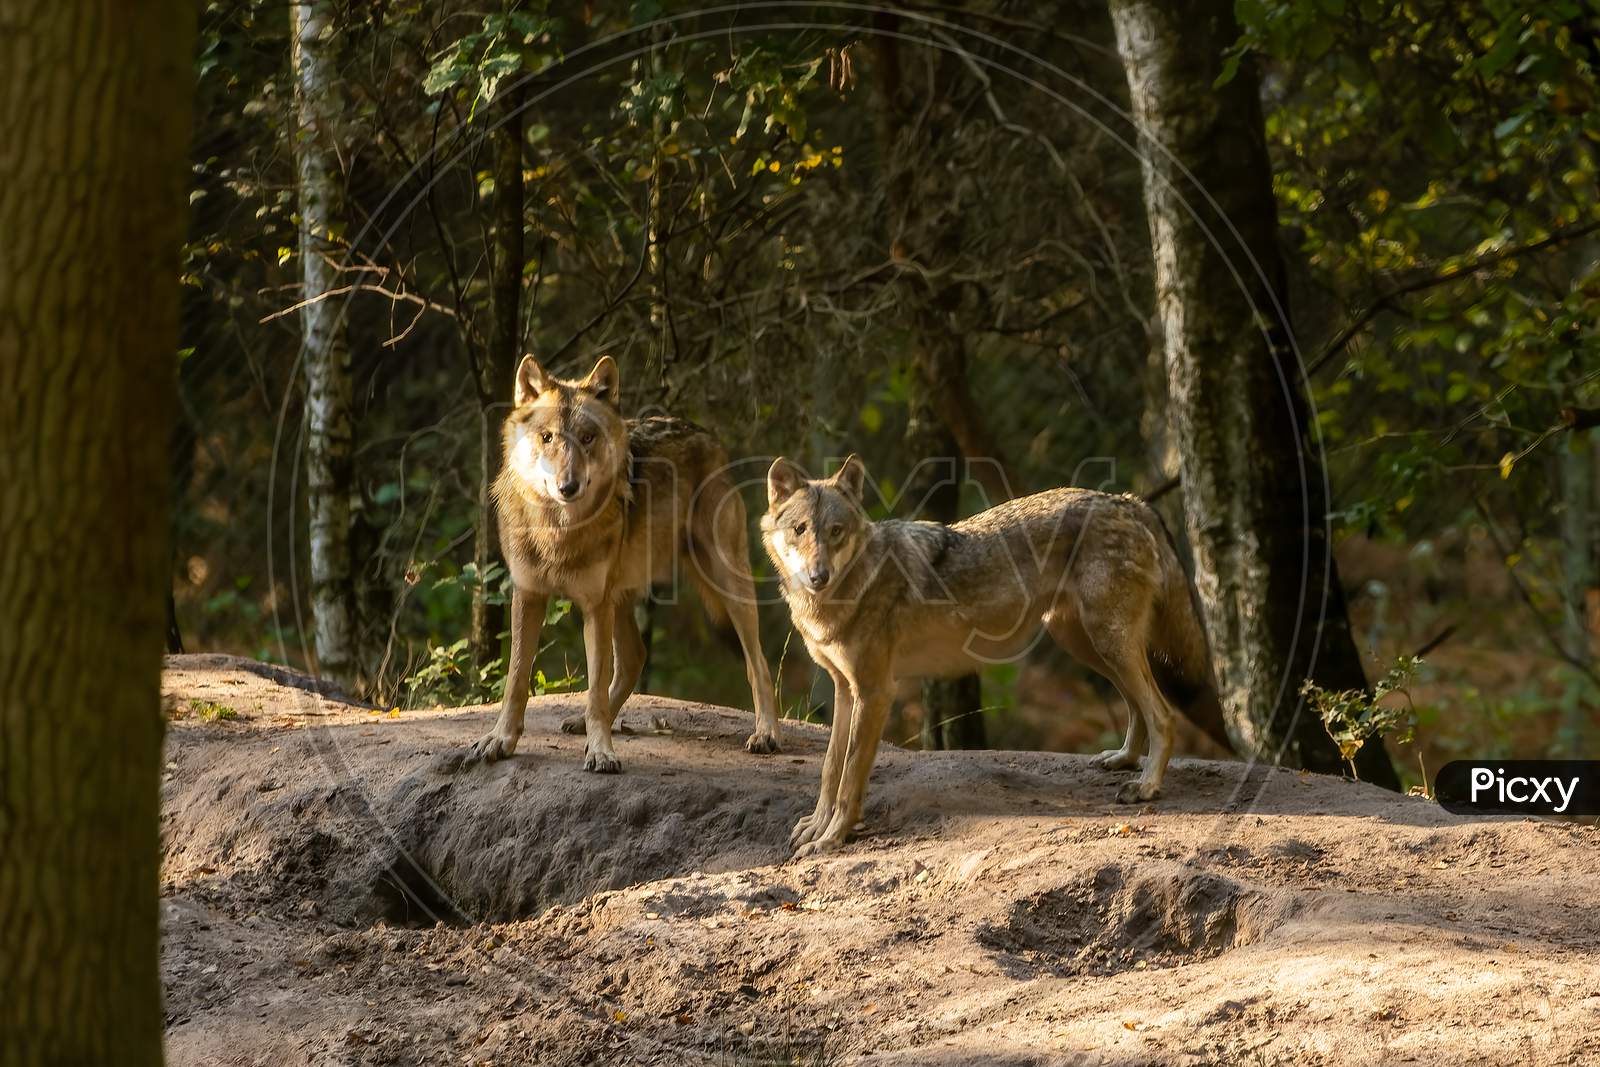 Wolf in a natural reserve in Hesse, Germany.